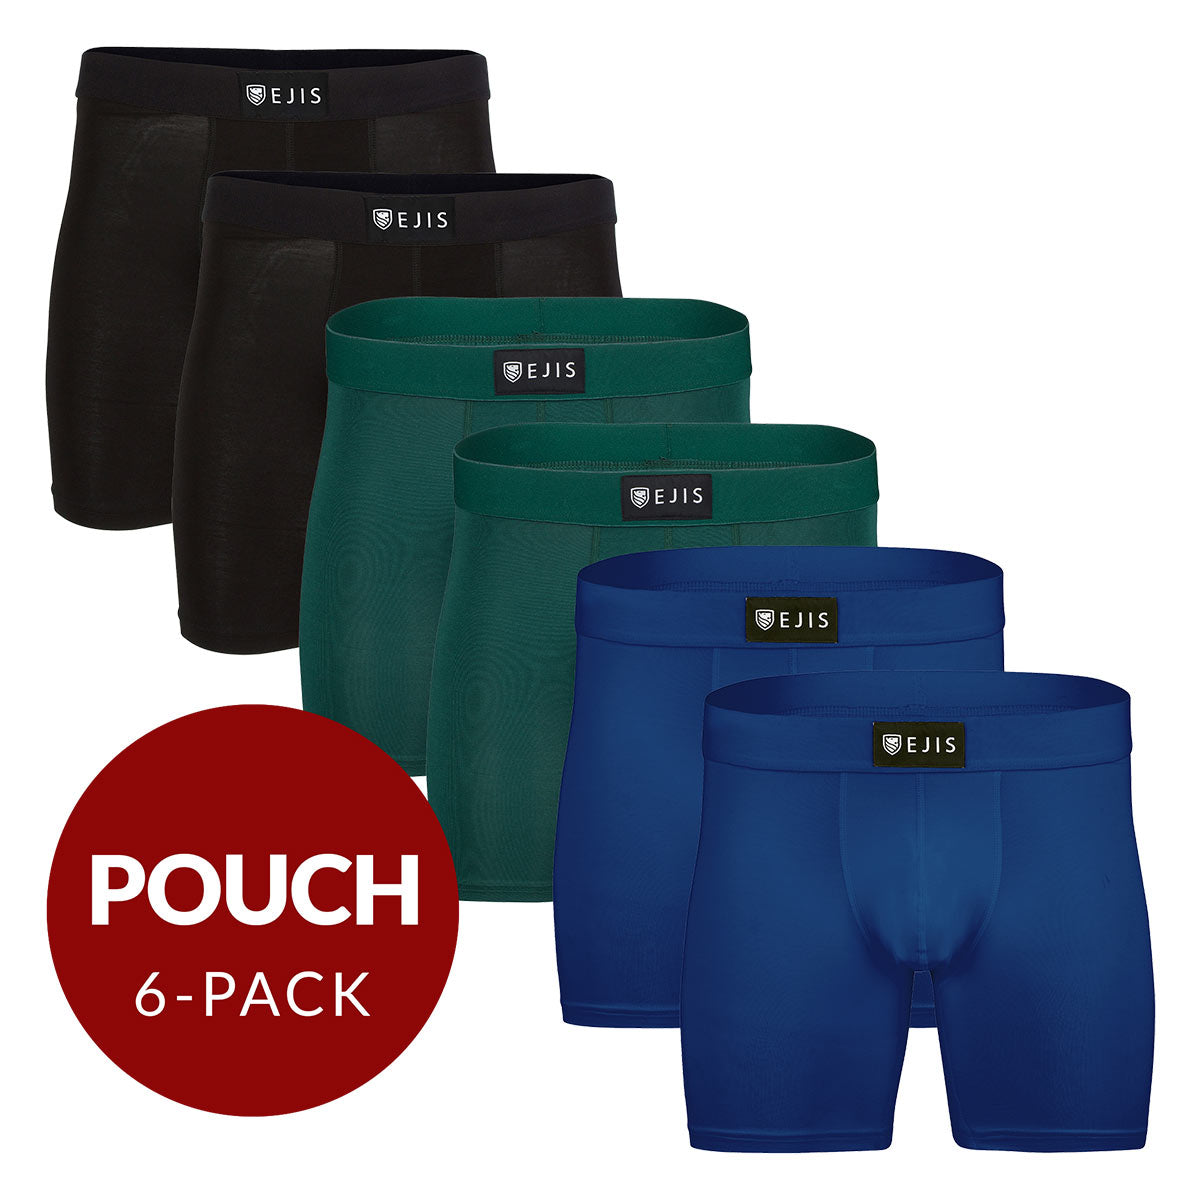 Sweat Proof Men's Boxer Briefs with Pouch - Mix 6-Pack (2x Black, Green, Navy) - Ejis